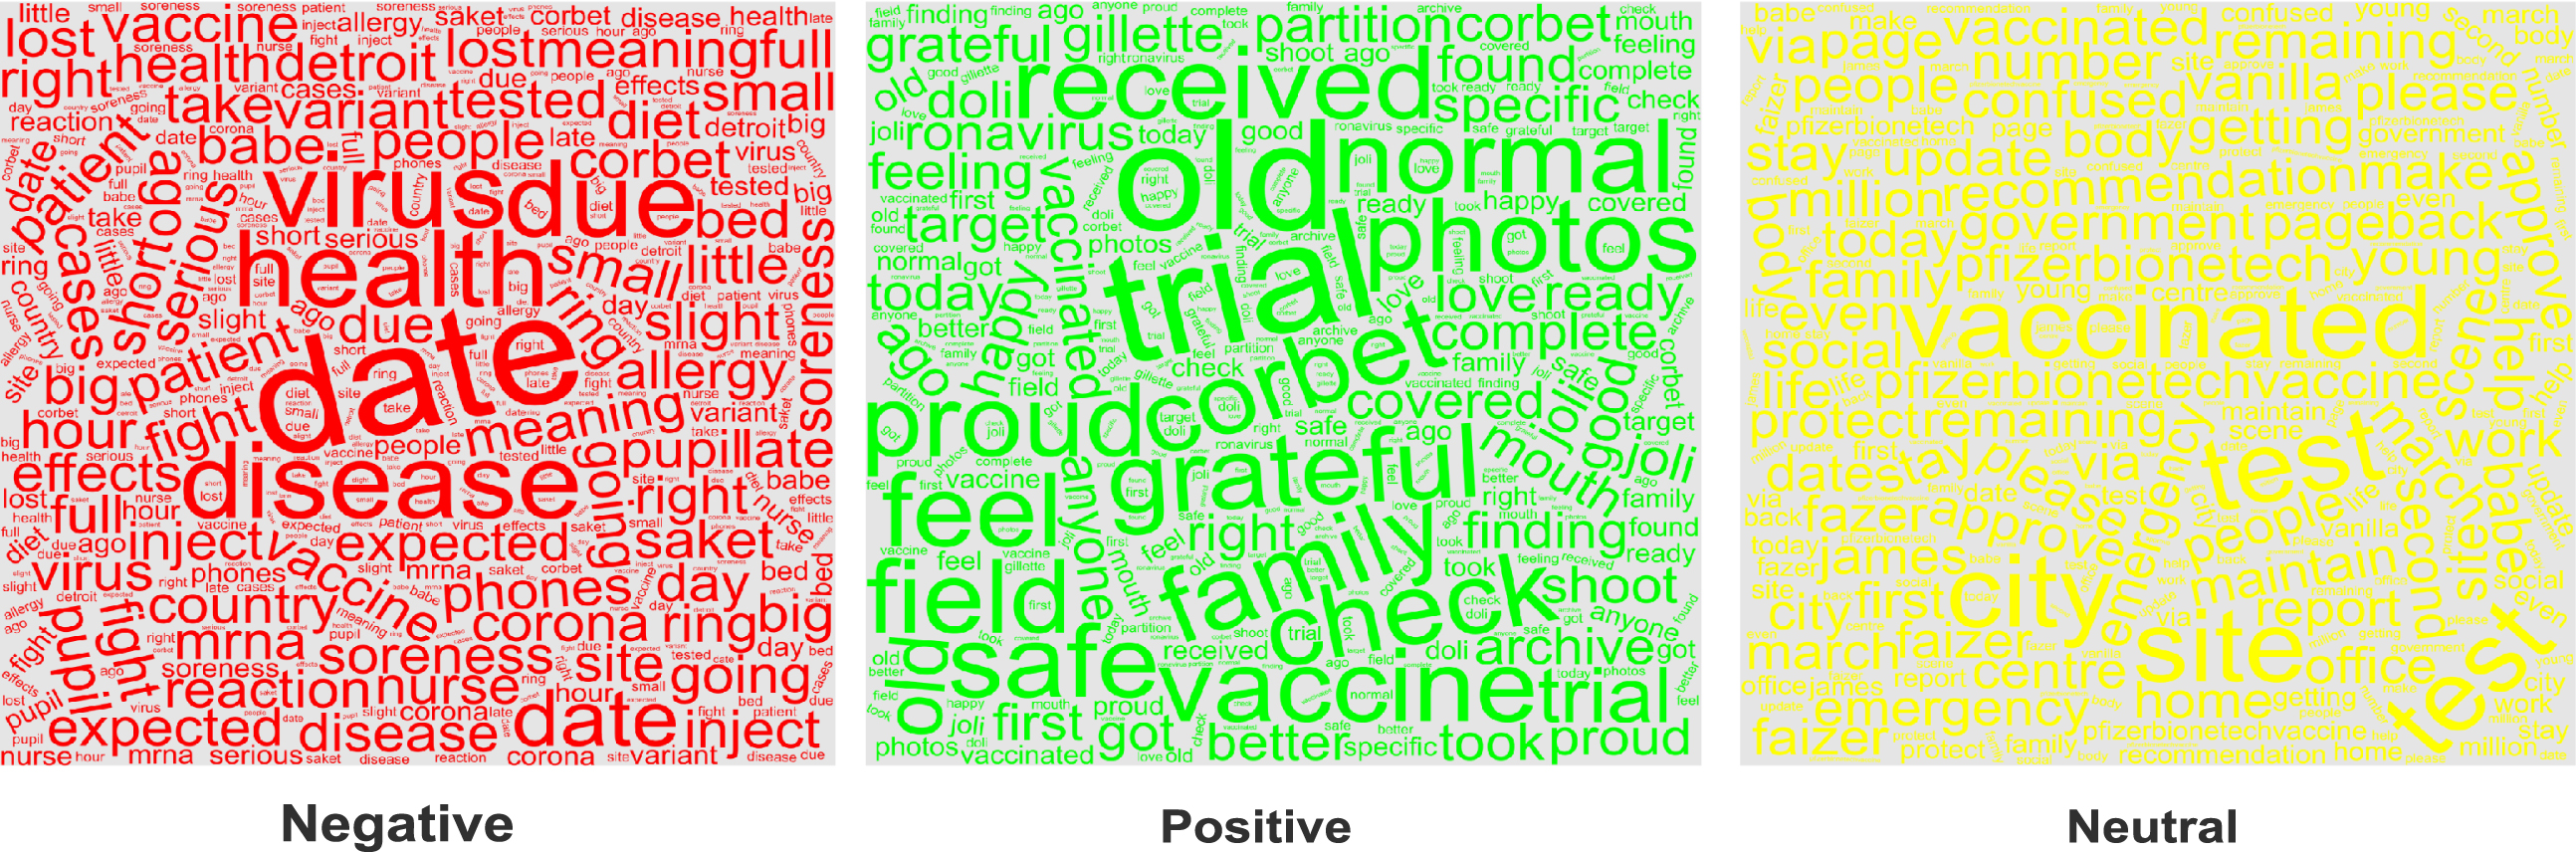 Negative, positive, and neutral sentiment about Pfizer and BioNTech COVID-19 vaccine.